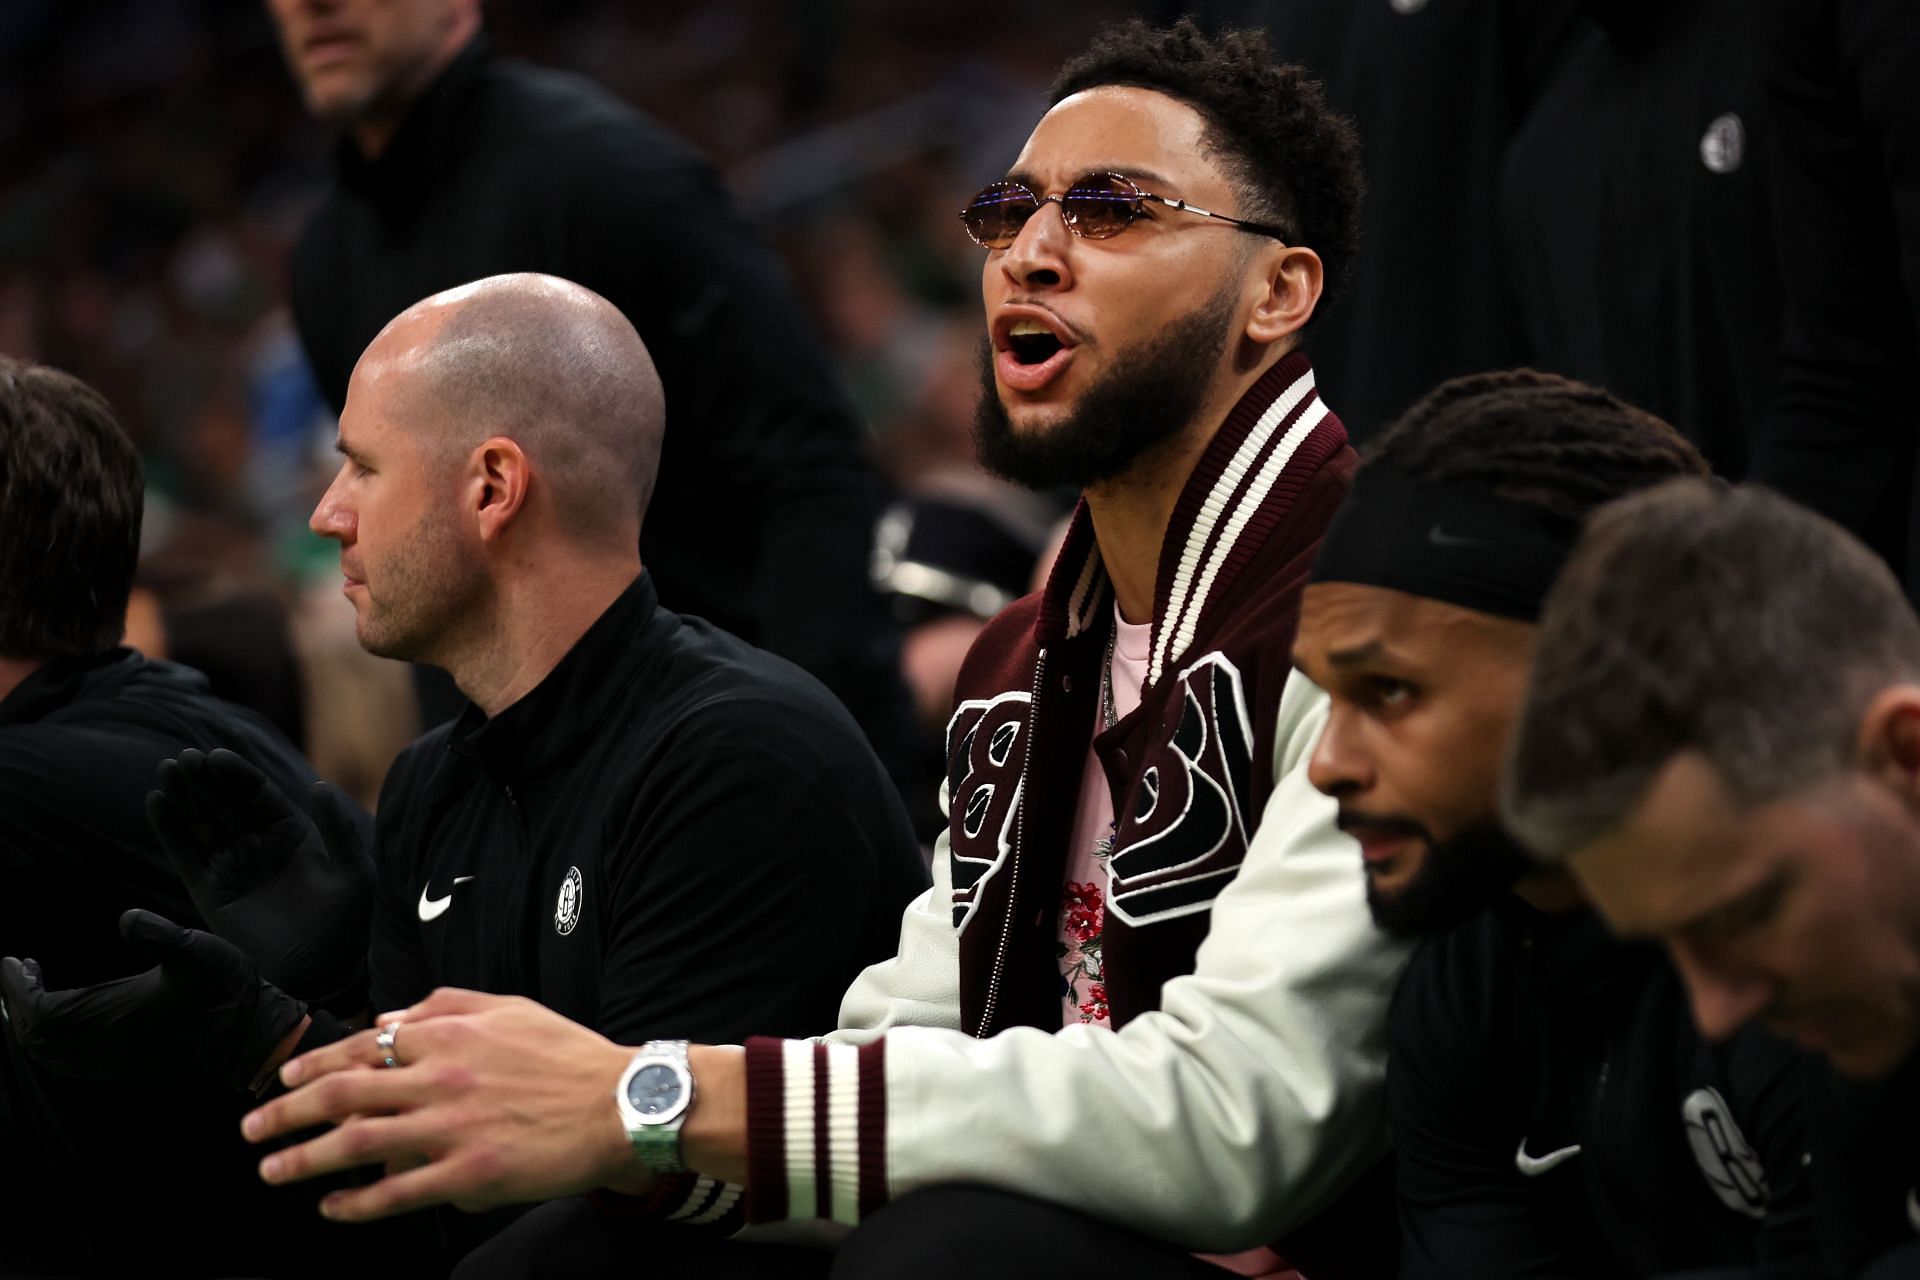 Ben Simmons is hoping to resurrect his career, according to Stephen A. Smith.